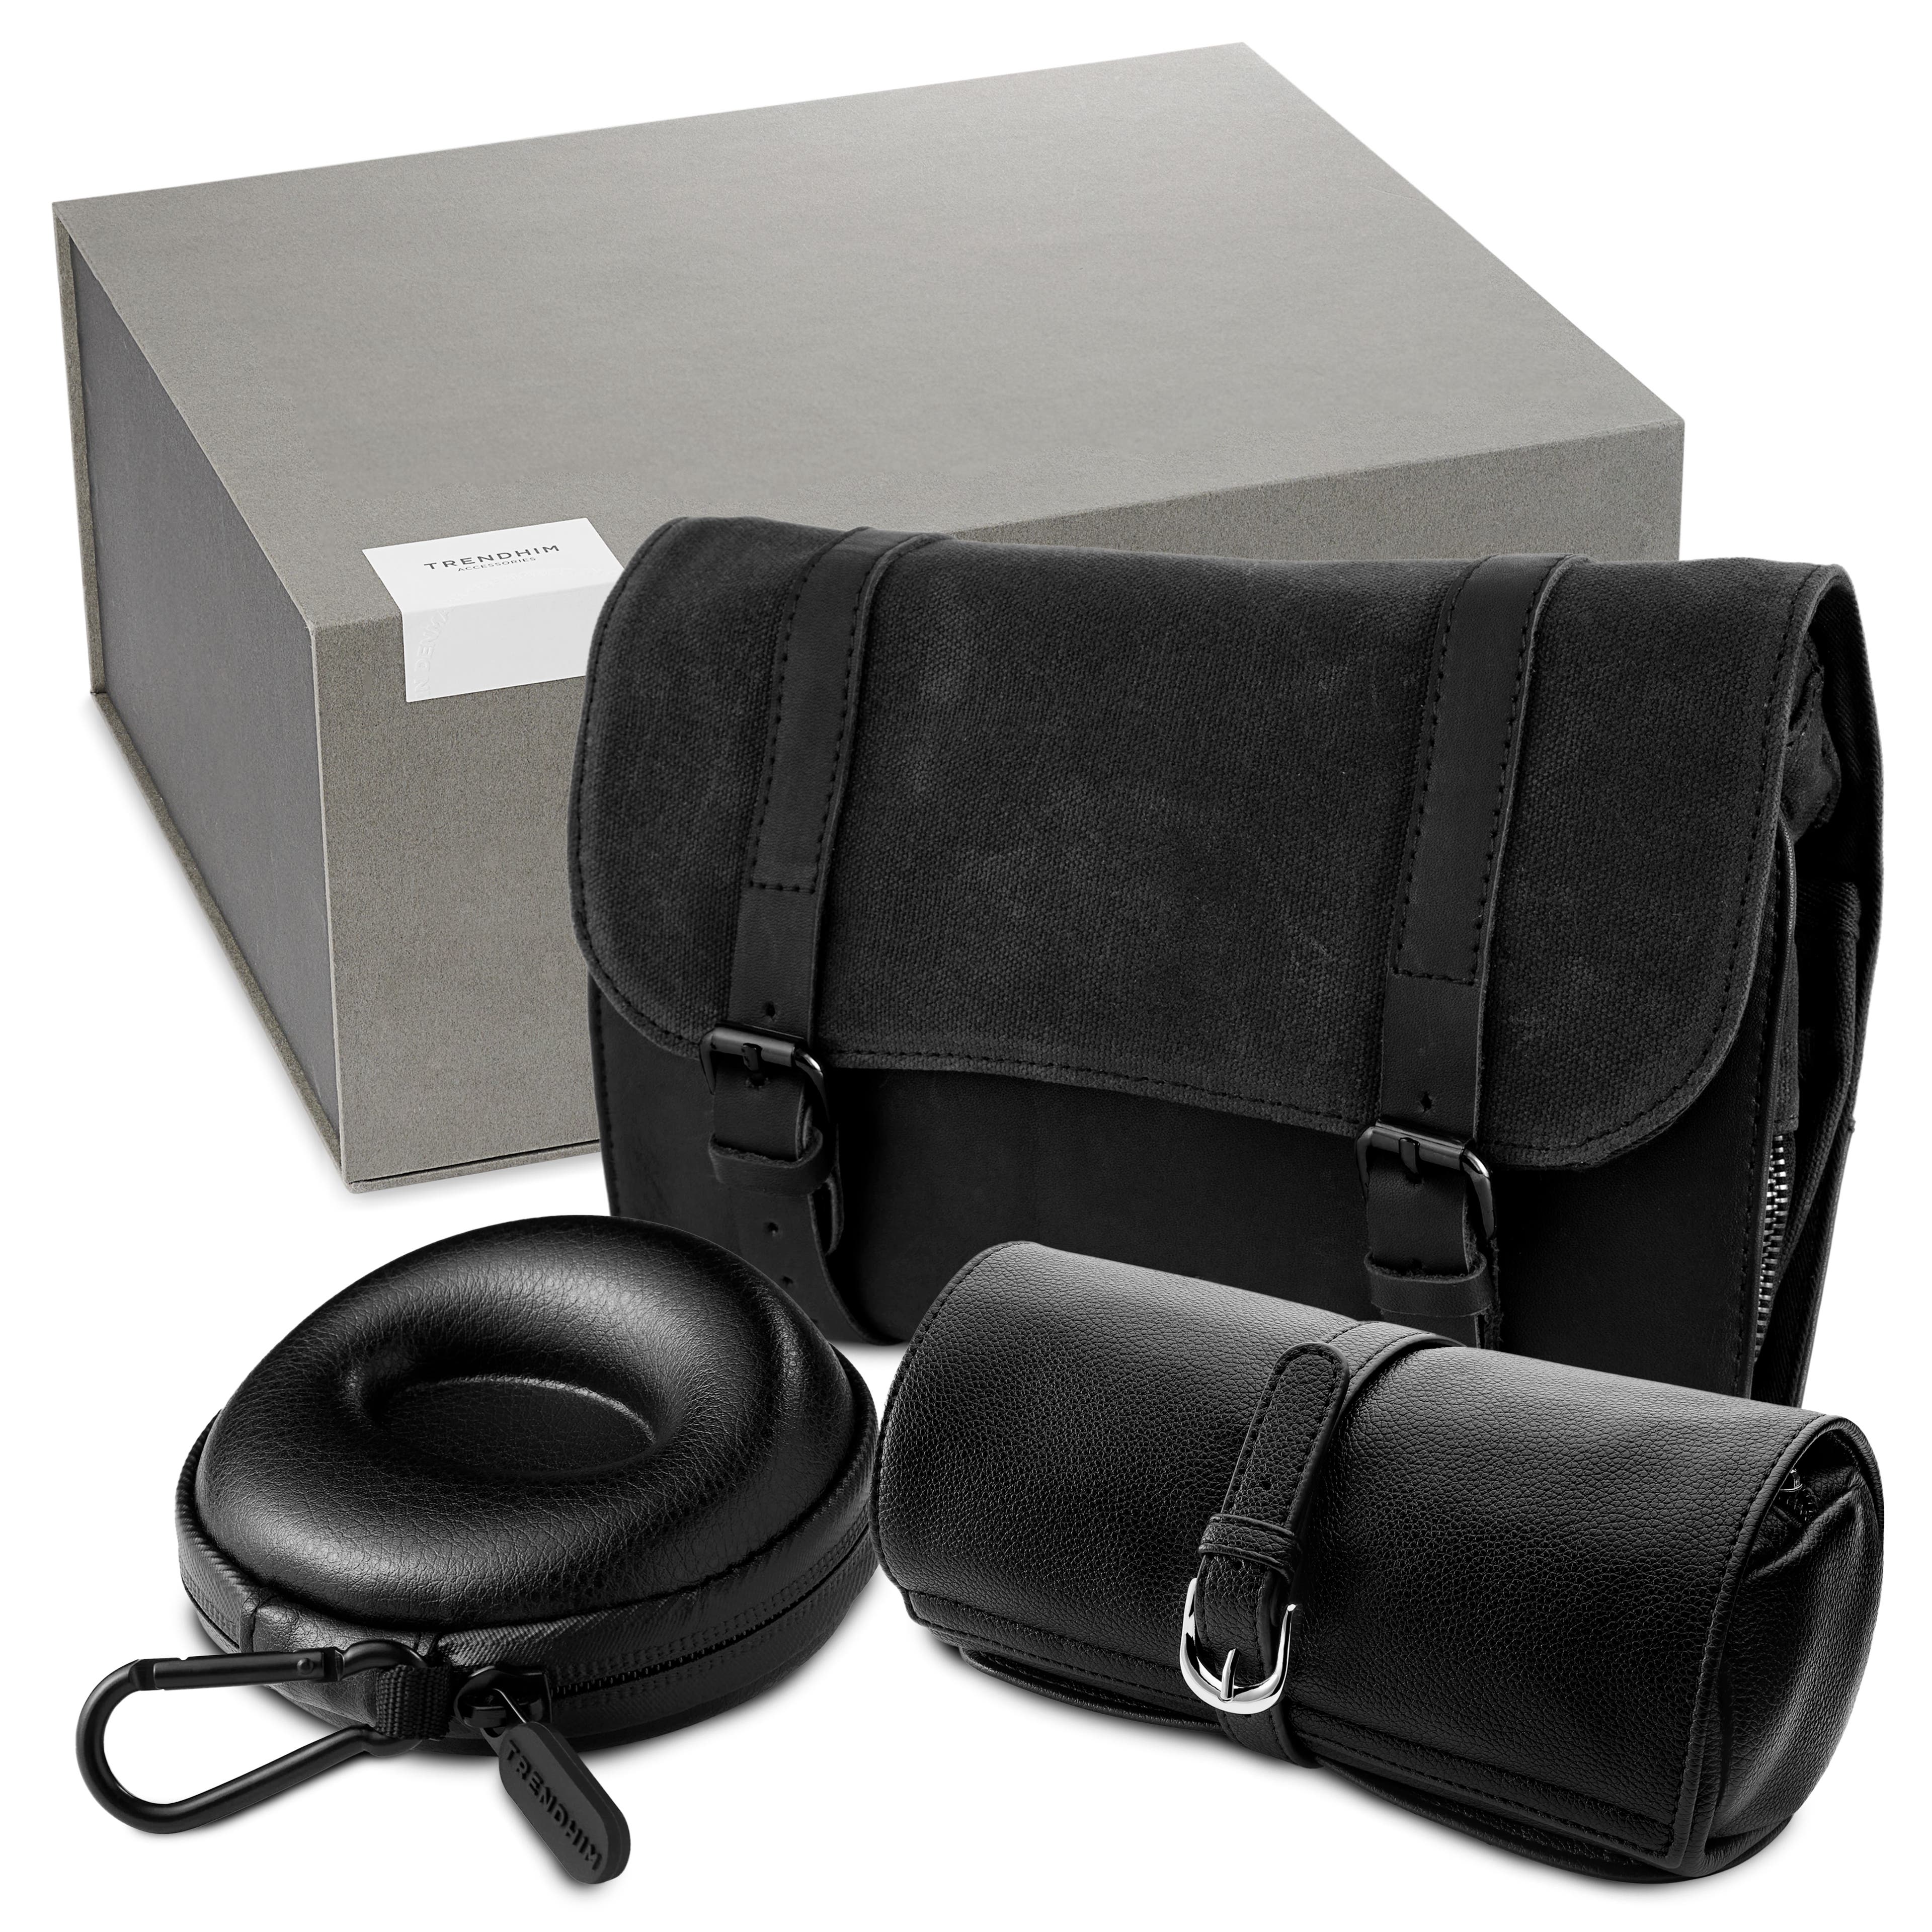 Deluxe Travel Organizer Gift Box | Black Leather & Canvas